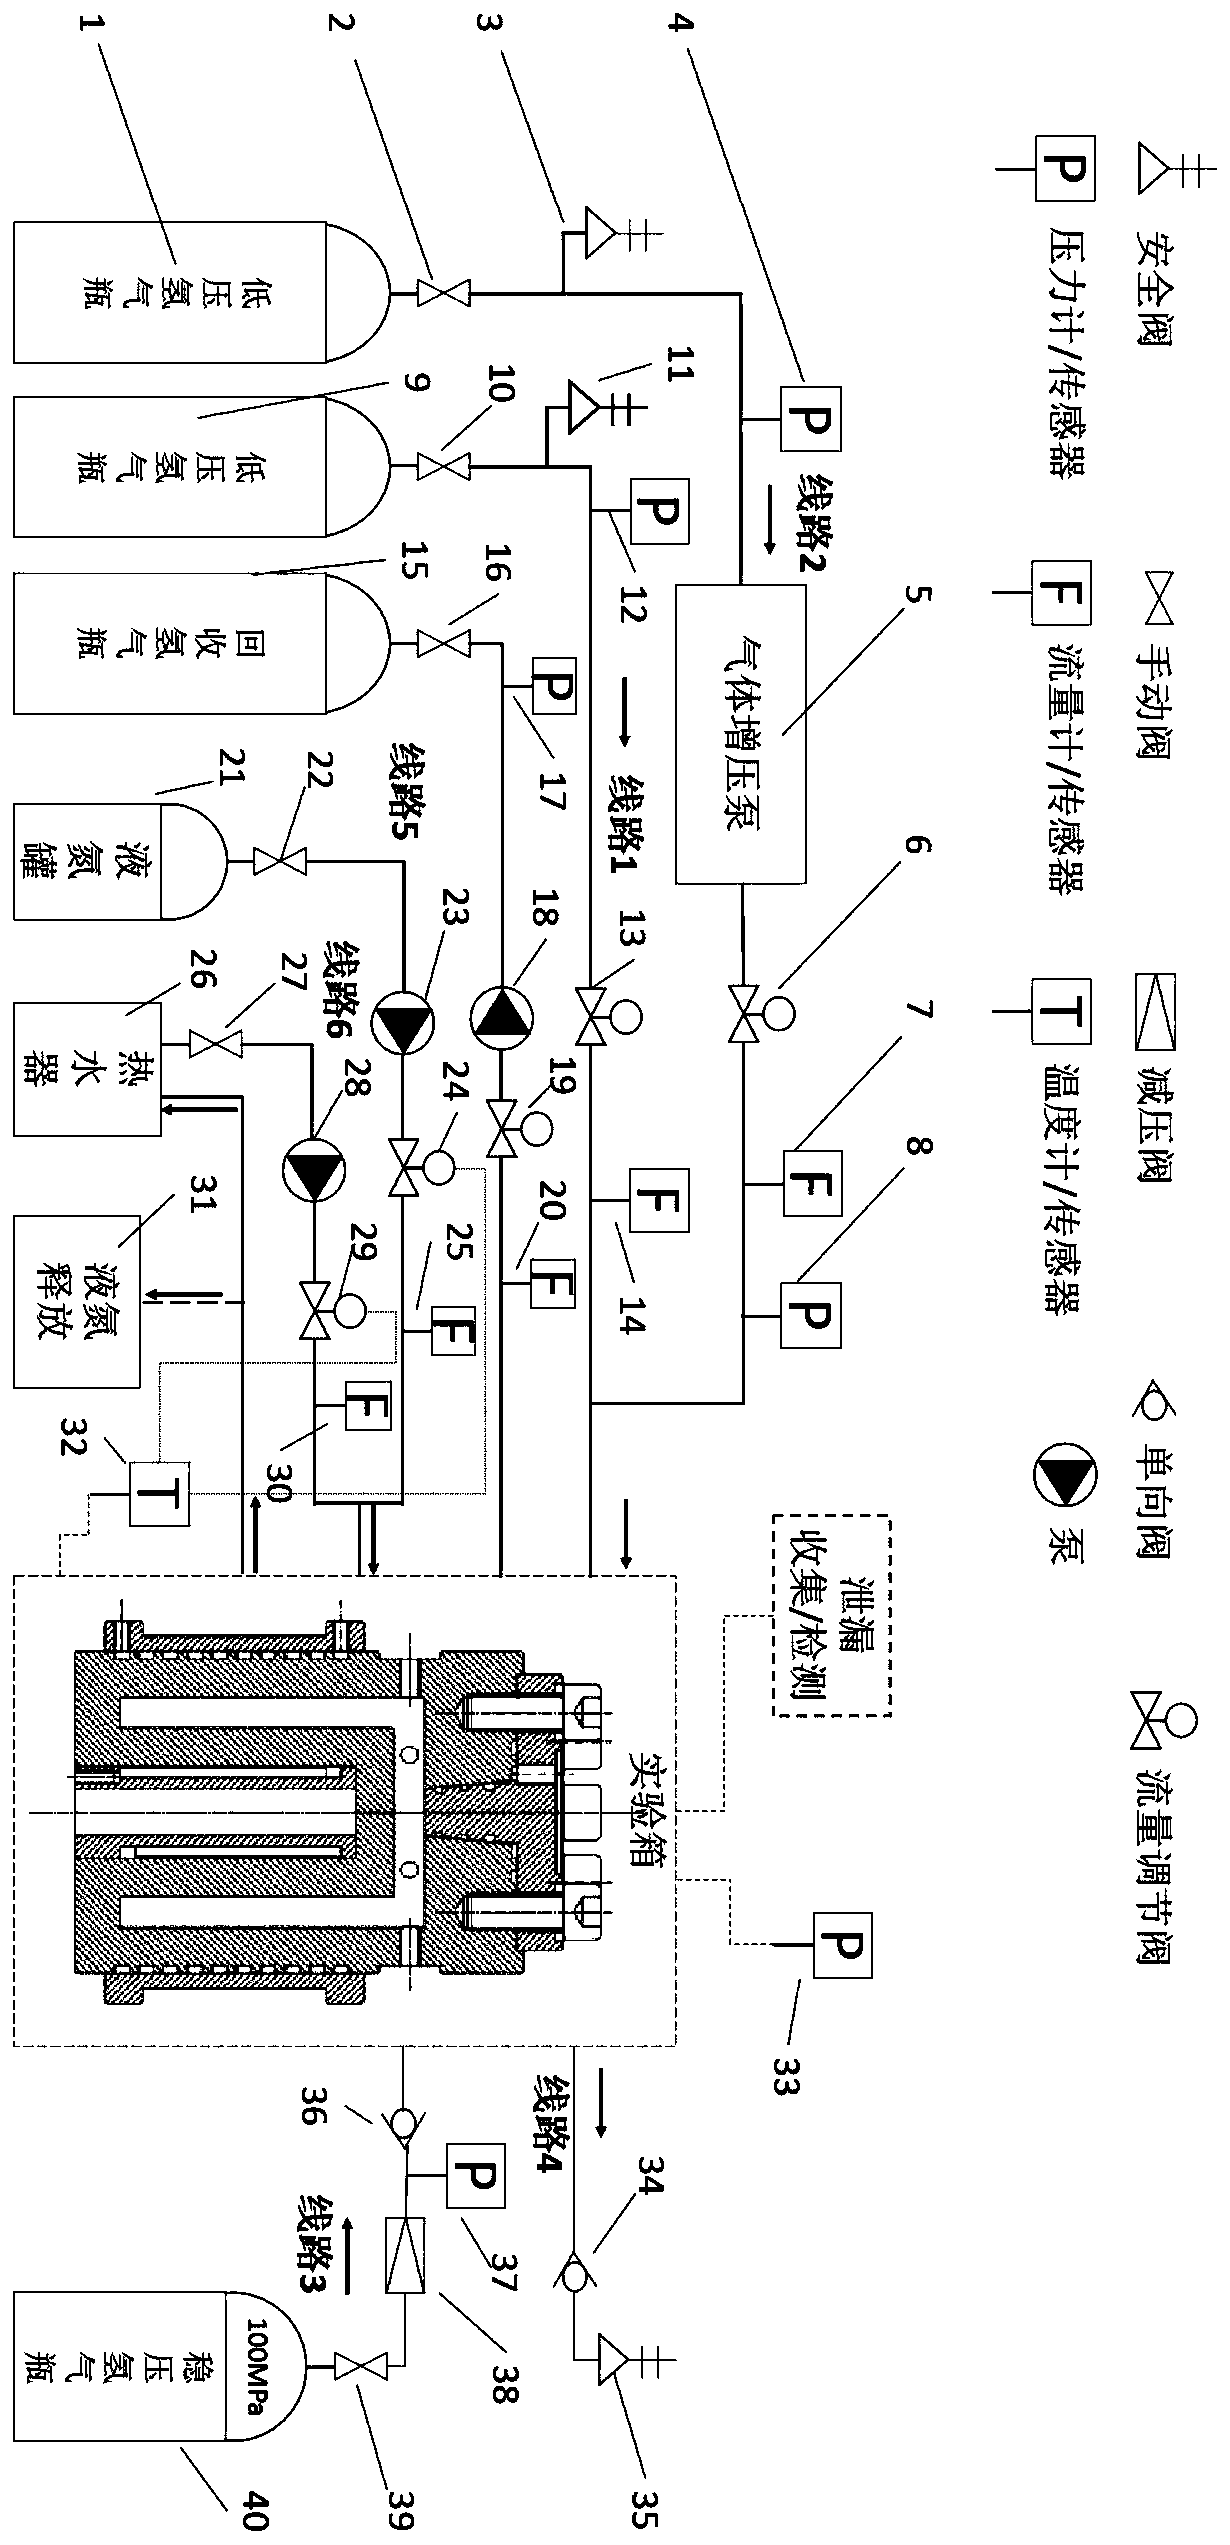 Auxiliary system for temperature-controllable and pressure-controlled gas sealing test platform